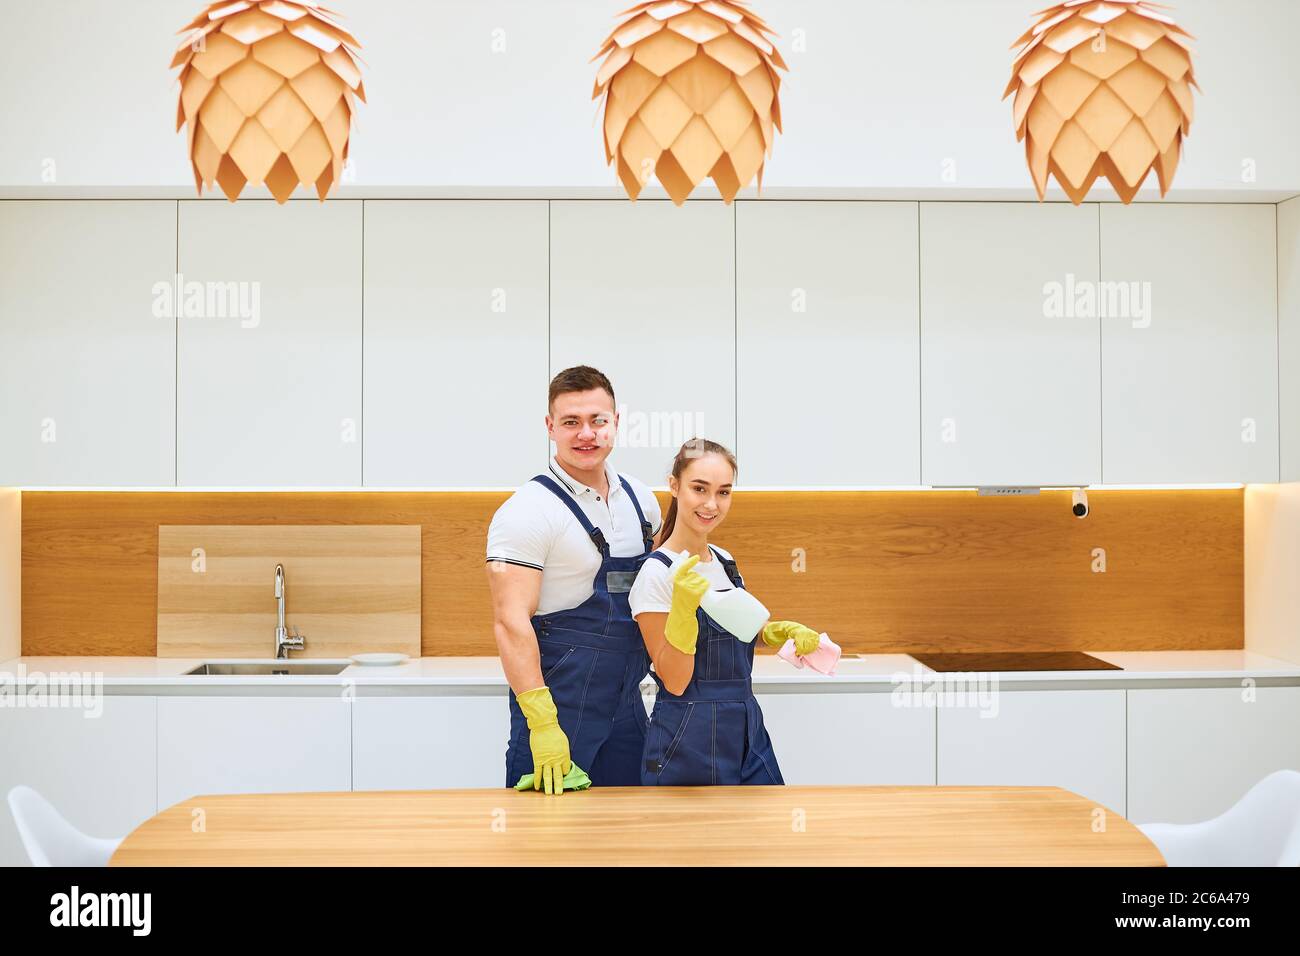 Successful team work of two janitors after work, posing in working blue uniforms, look at camera. White kitchen background Stock Photo